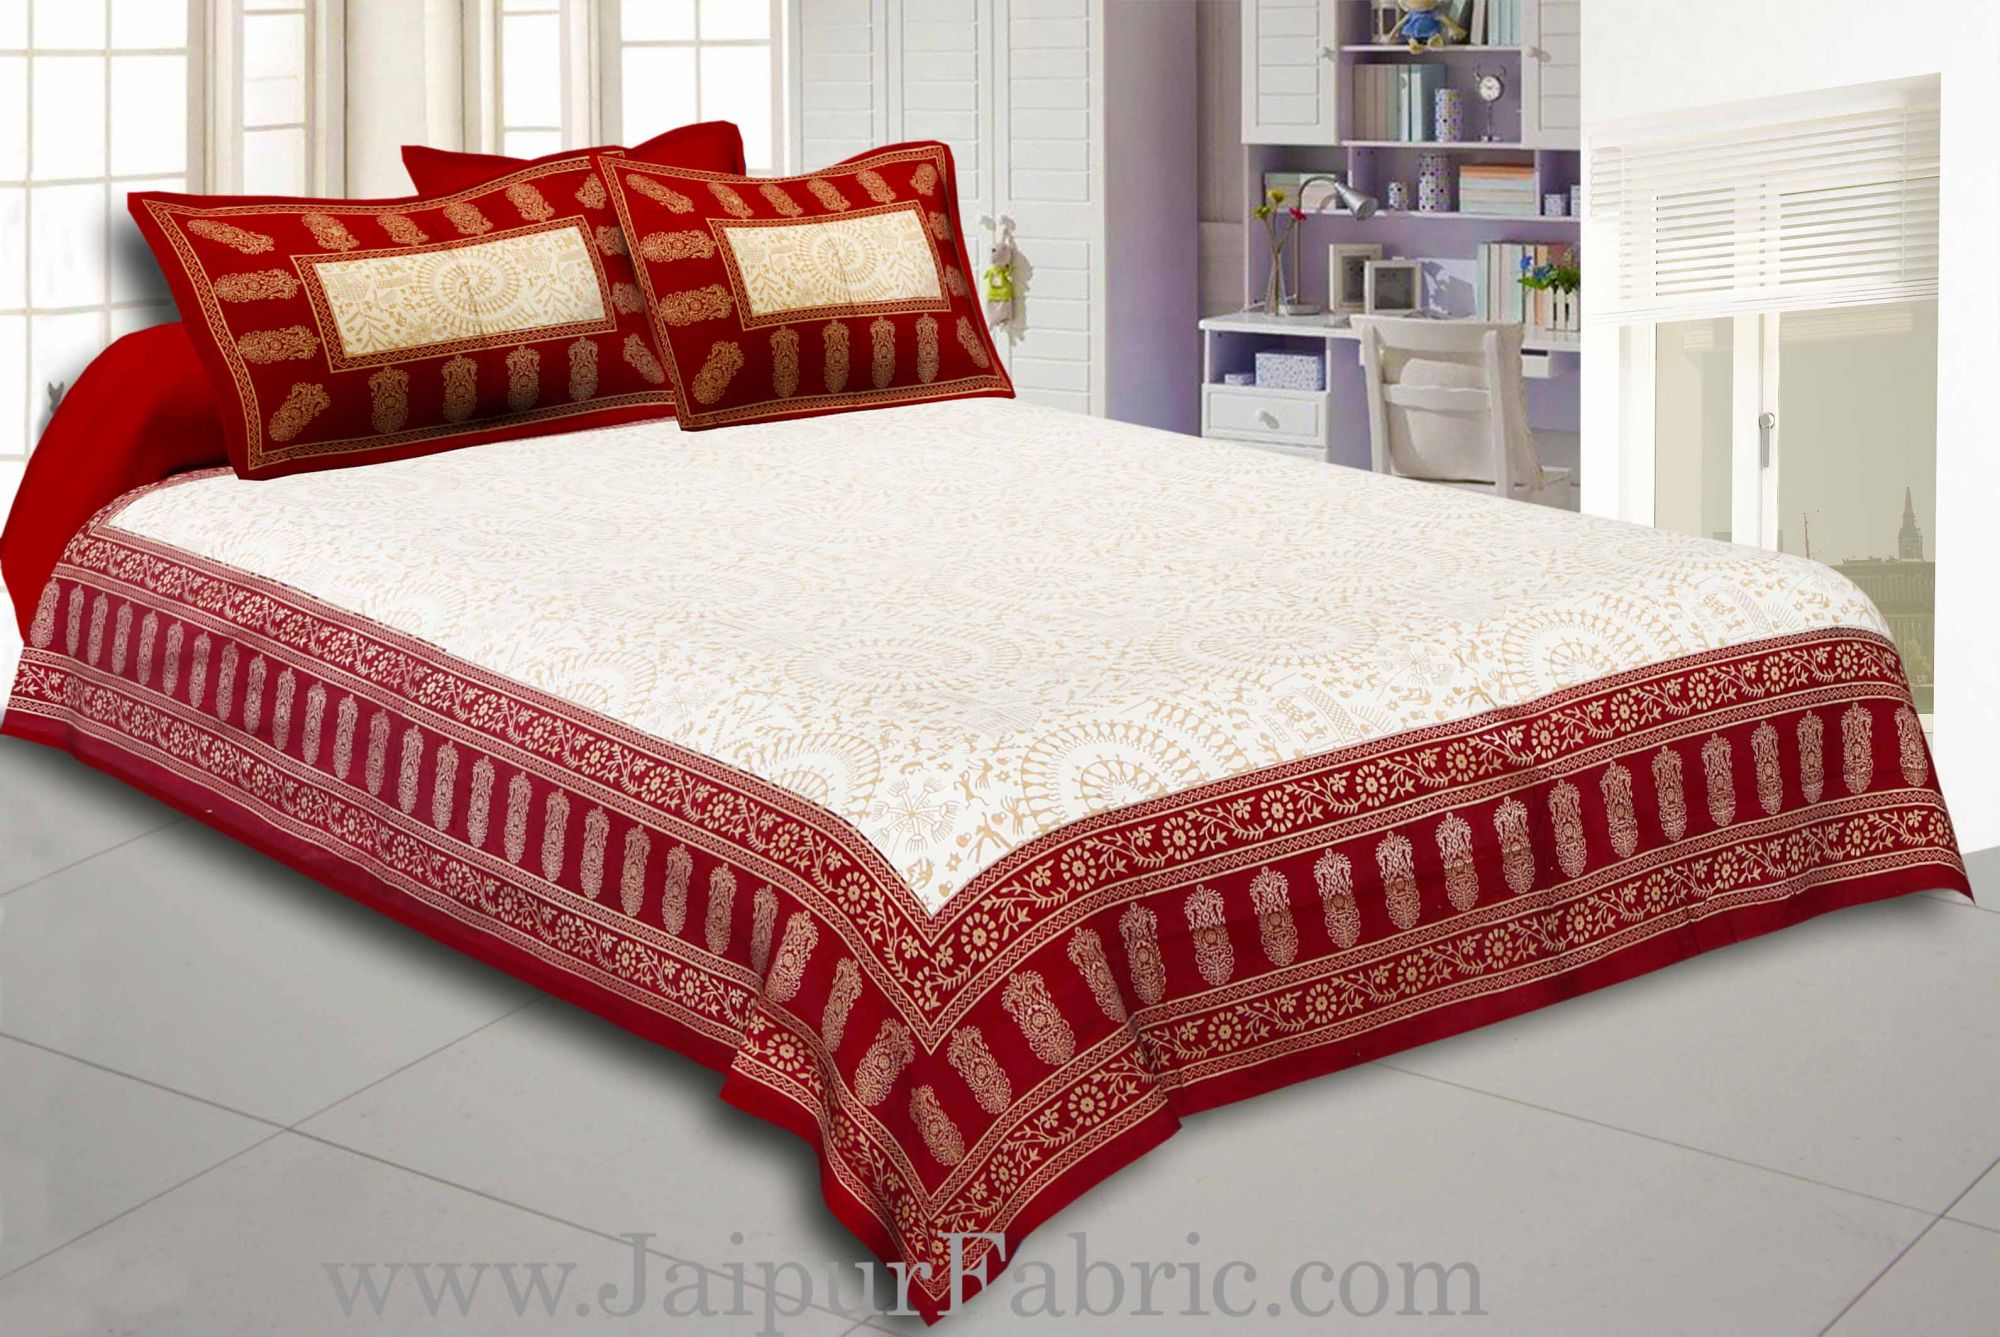 Maroon Border Cream Base With Golden Print Figure Print Super Fine Cotton Double Bed Sheet